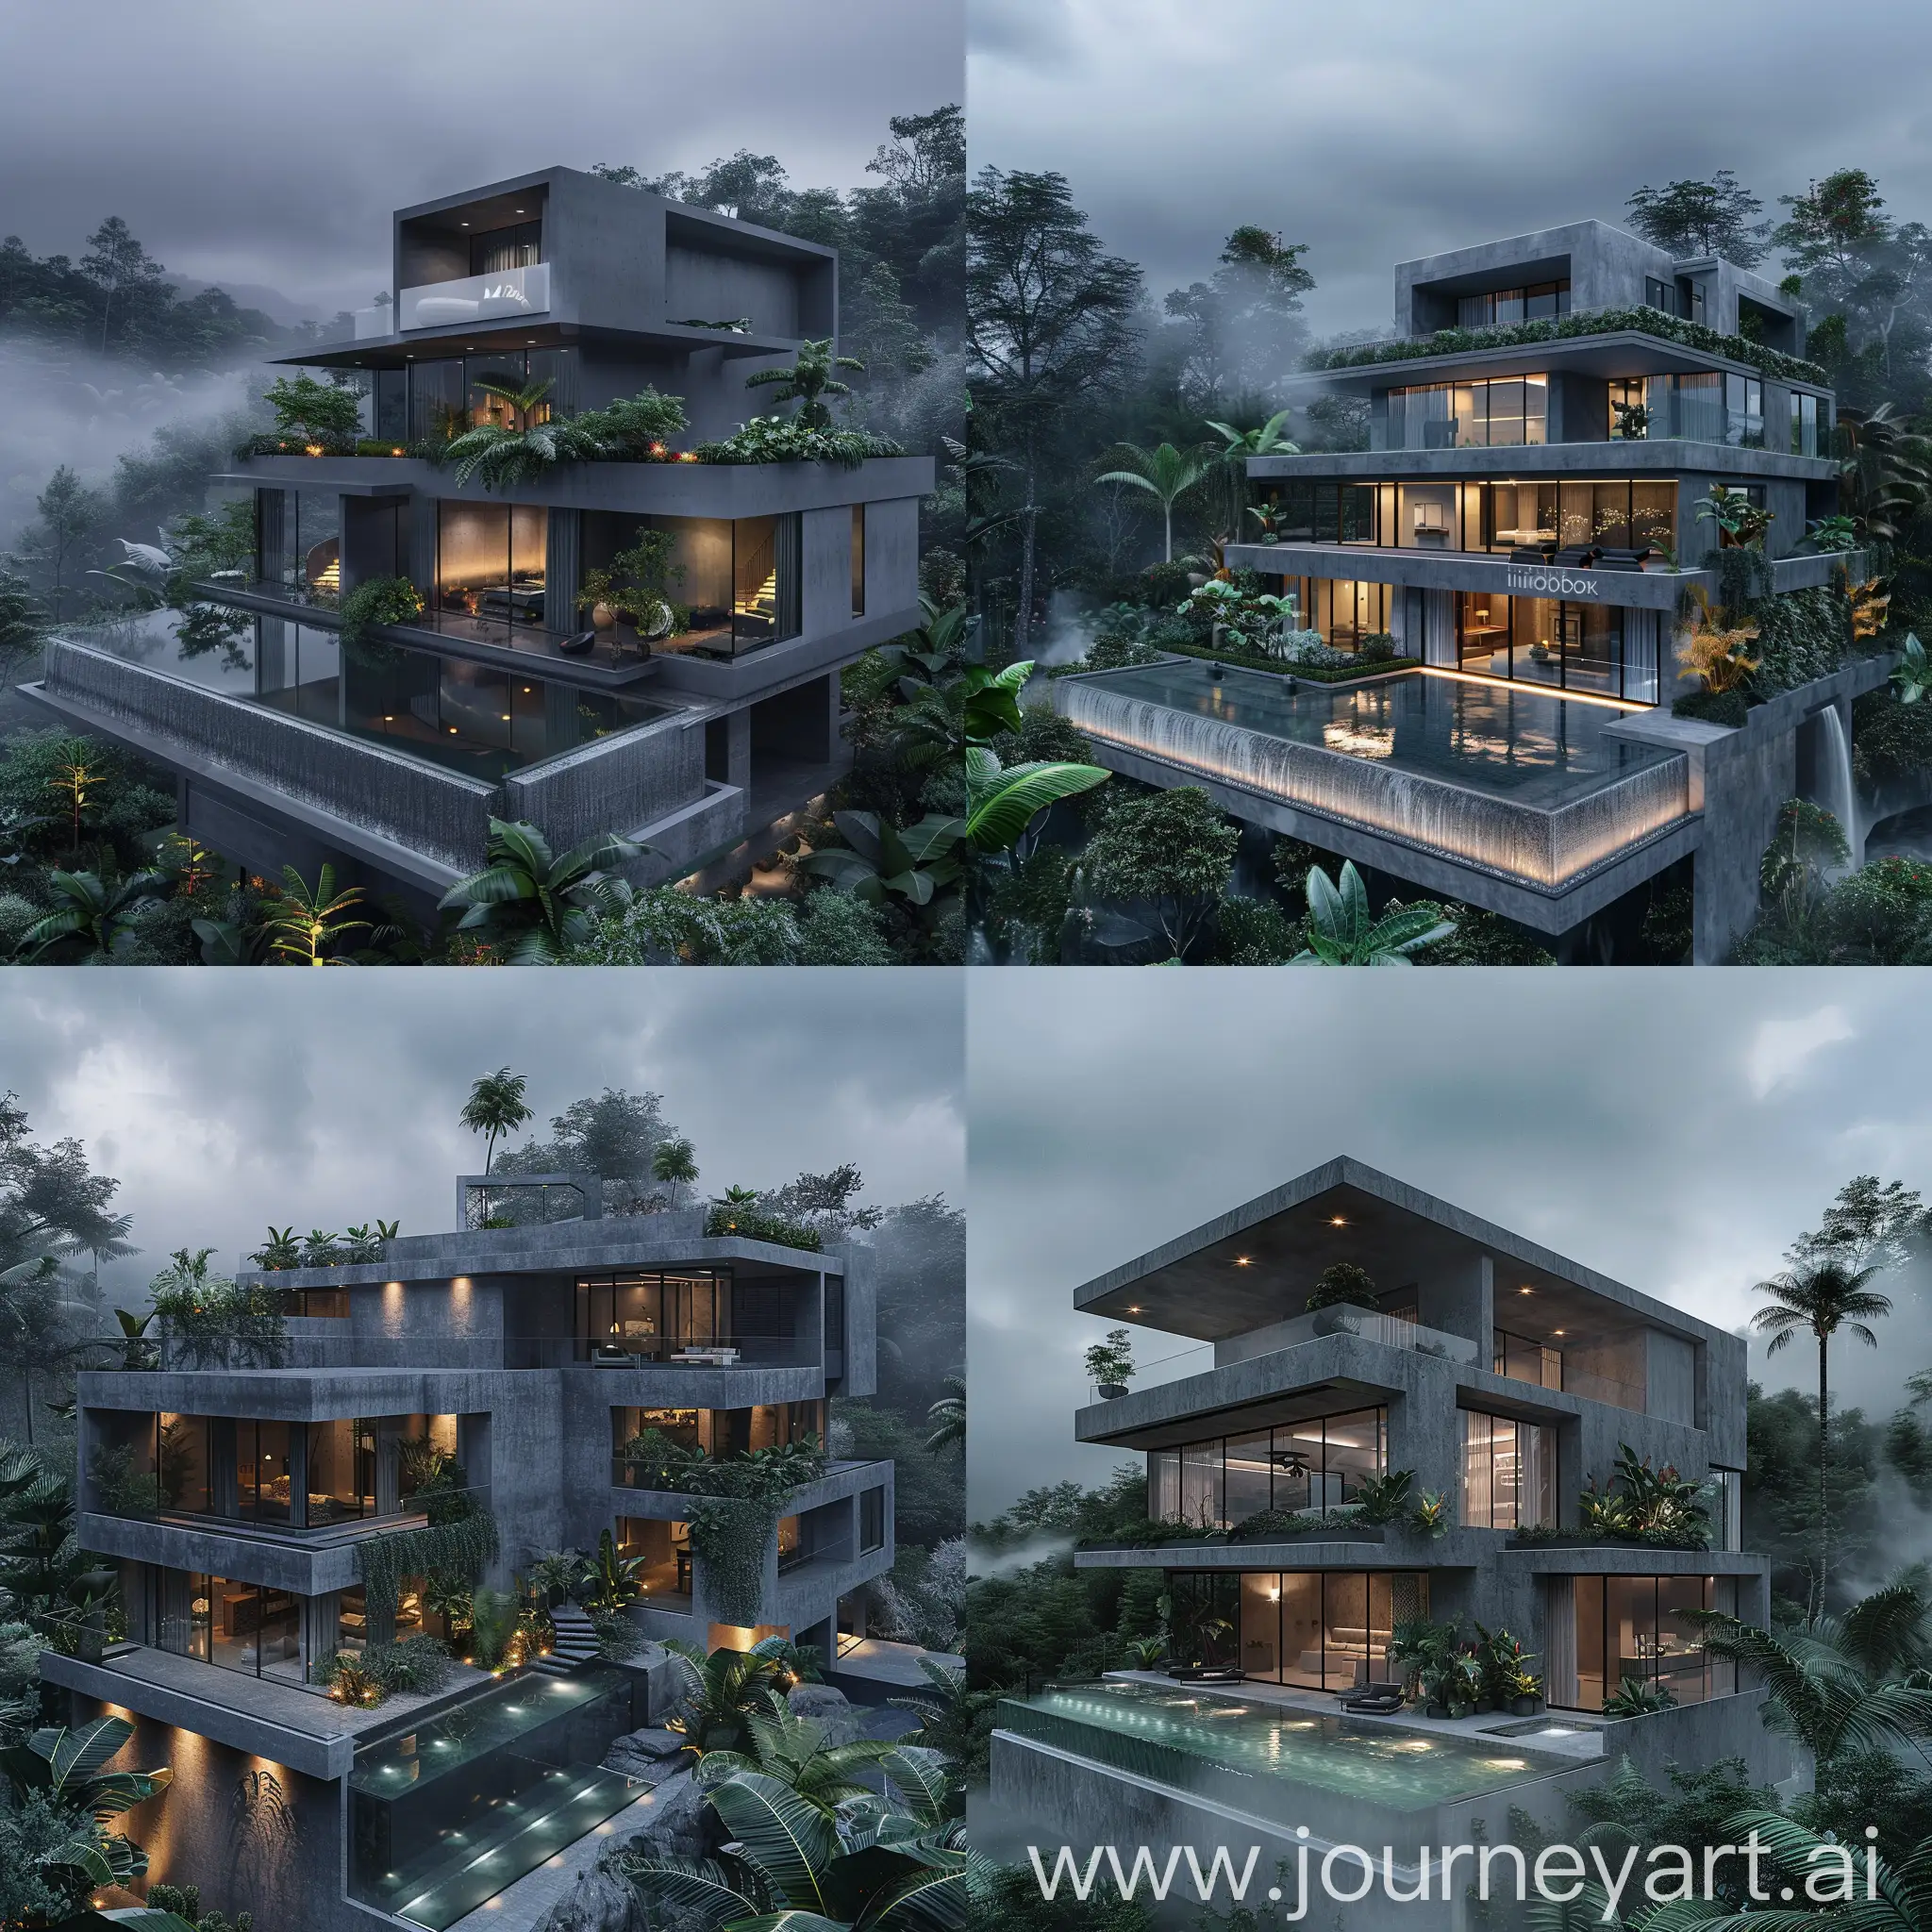 Modern-Villa-with-Infinity-Glass-Pool-in-Tropical-Forest-Setting